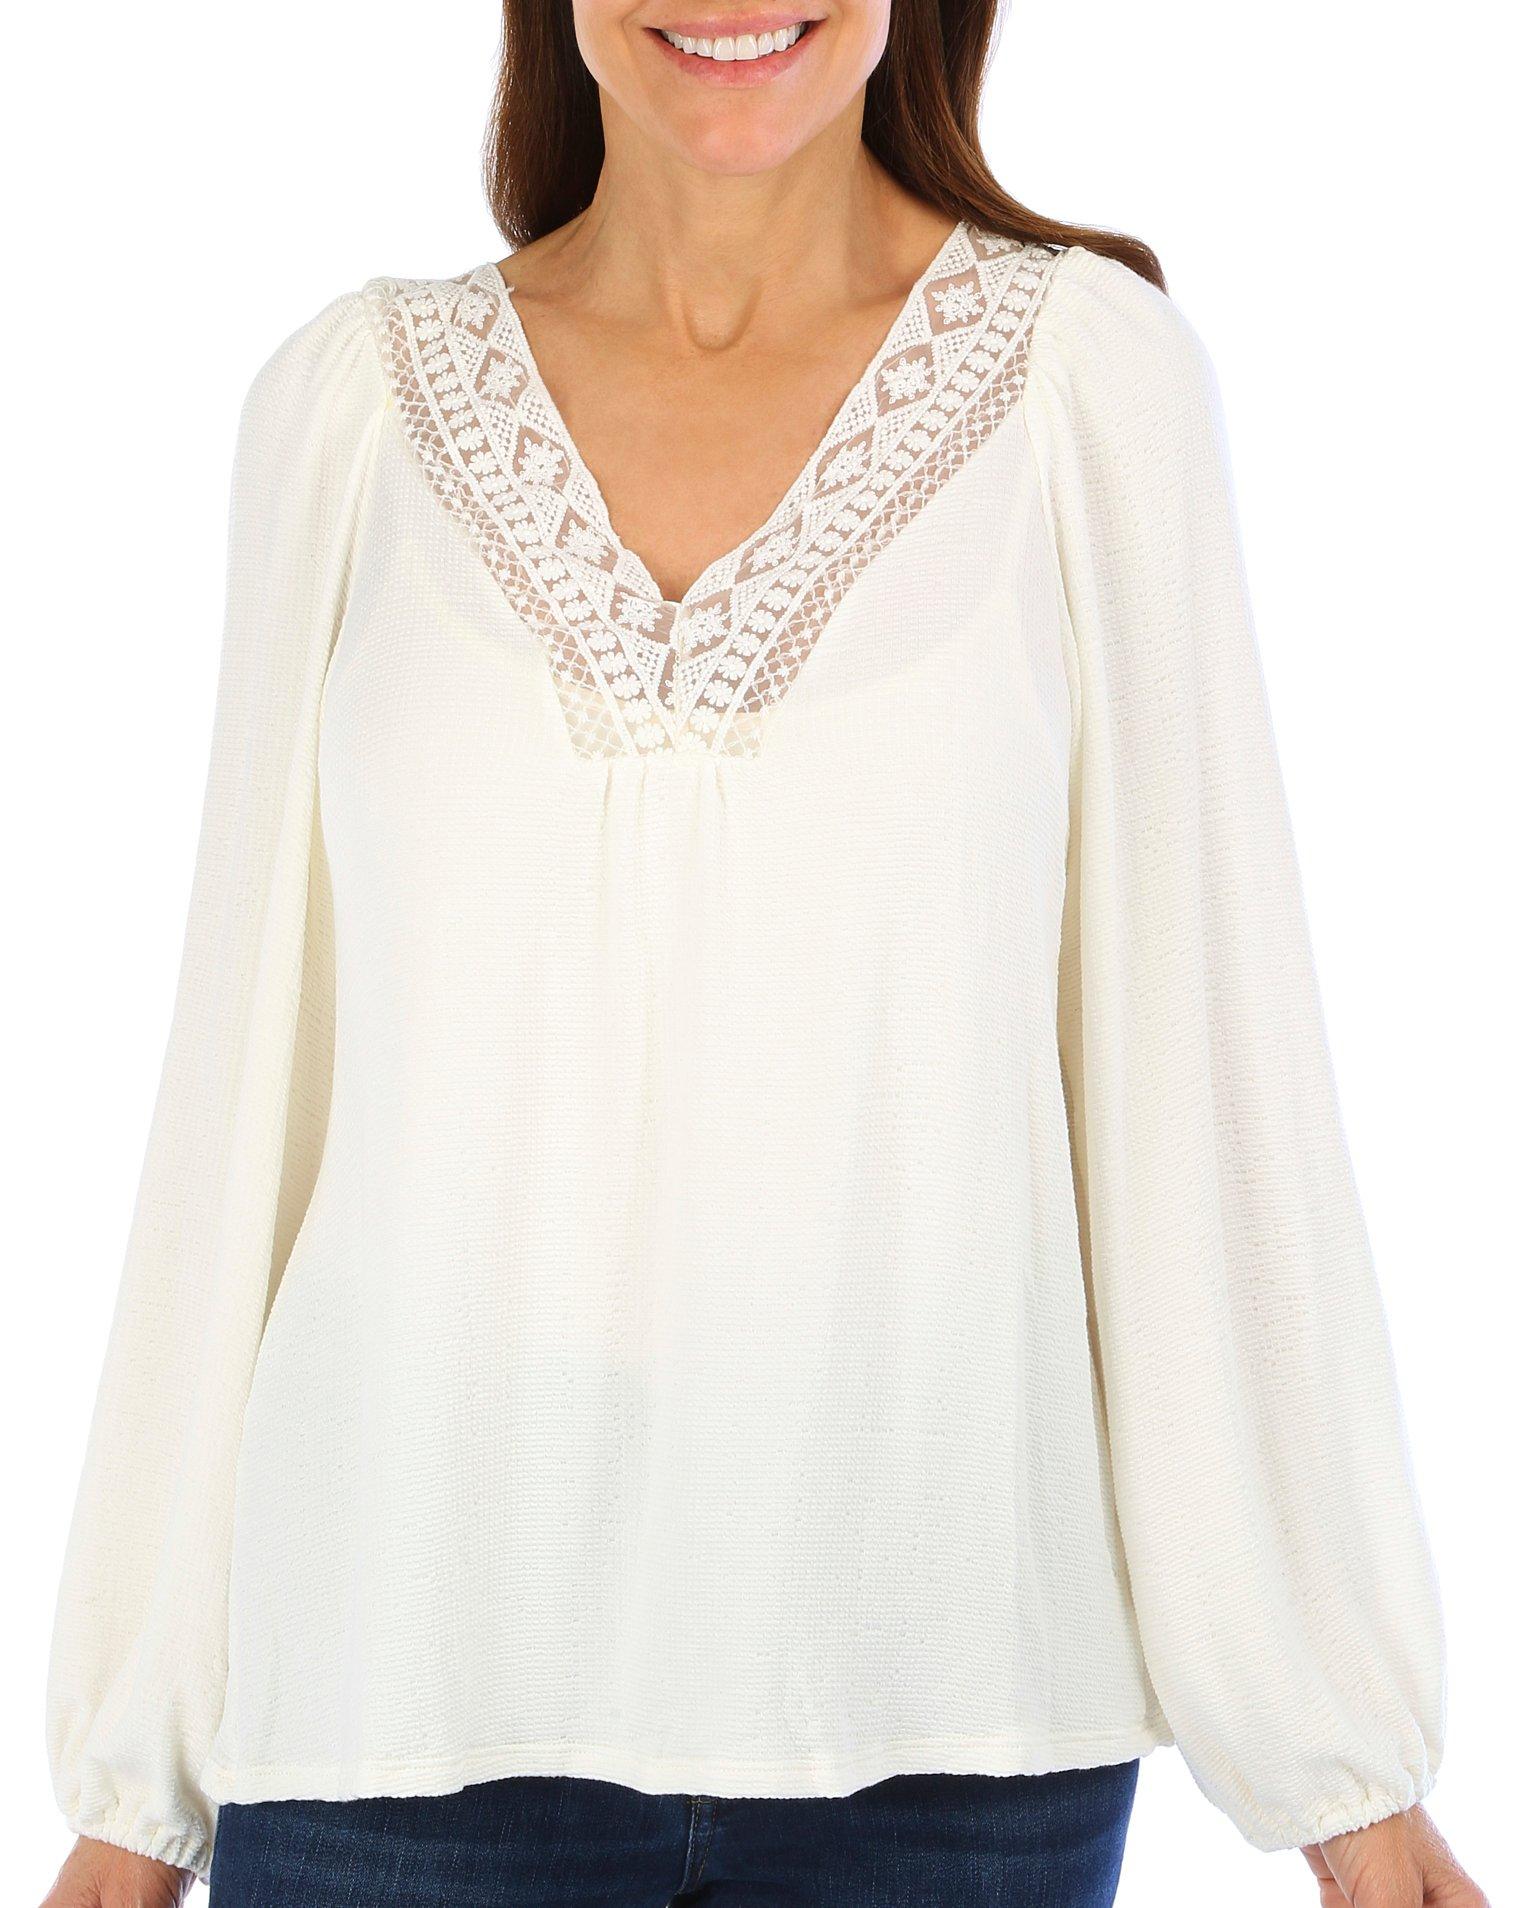 Above and Beyond Womens Lace Trimmed V-Neck Long Sleeve Top